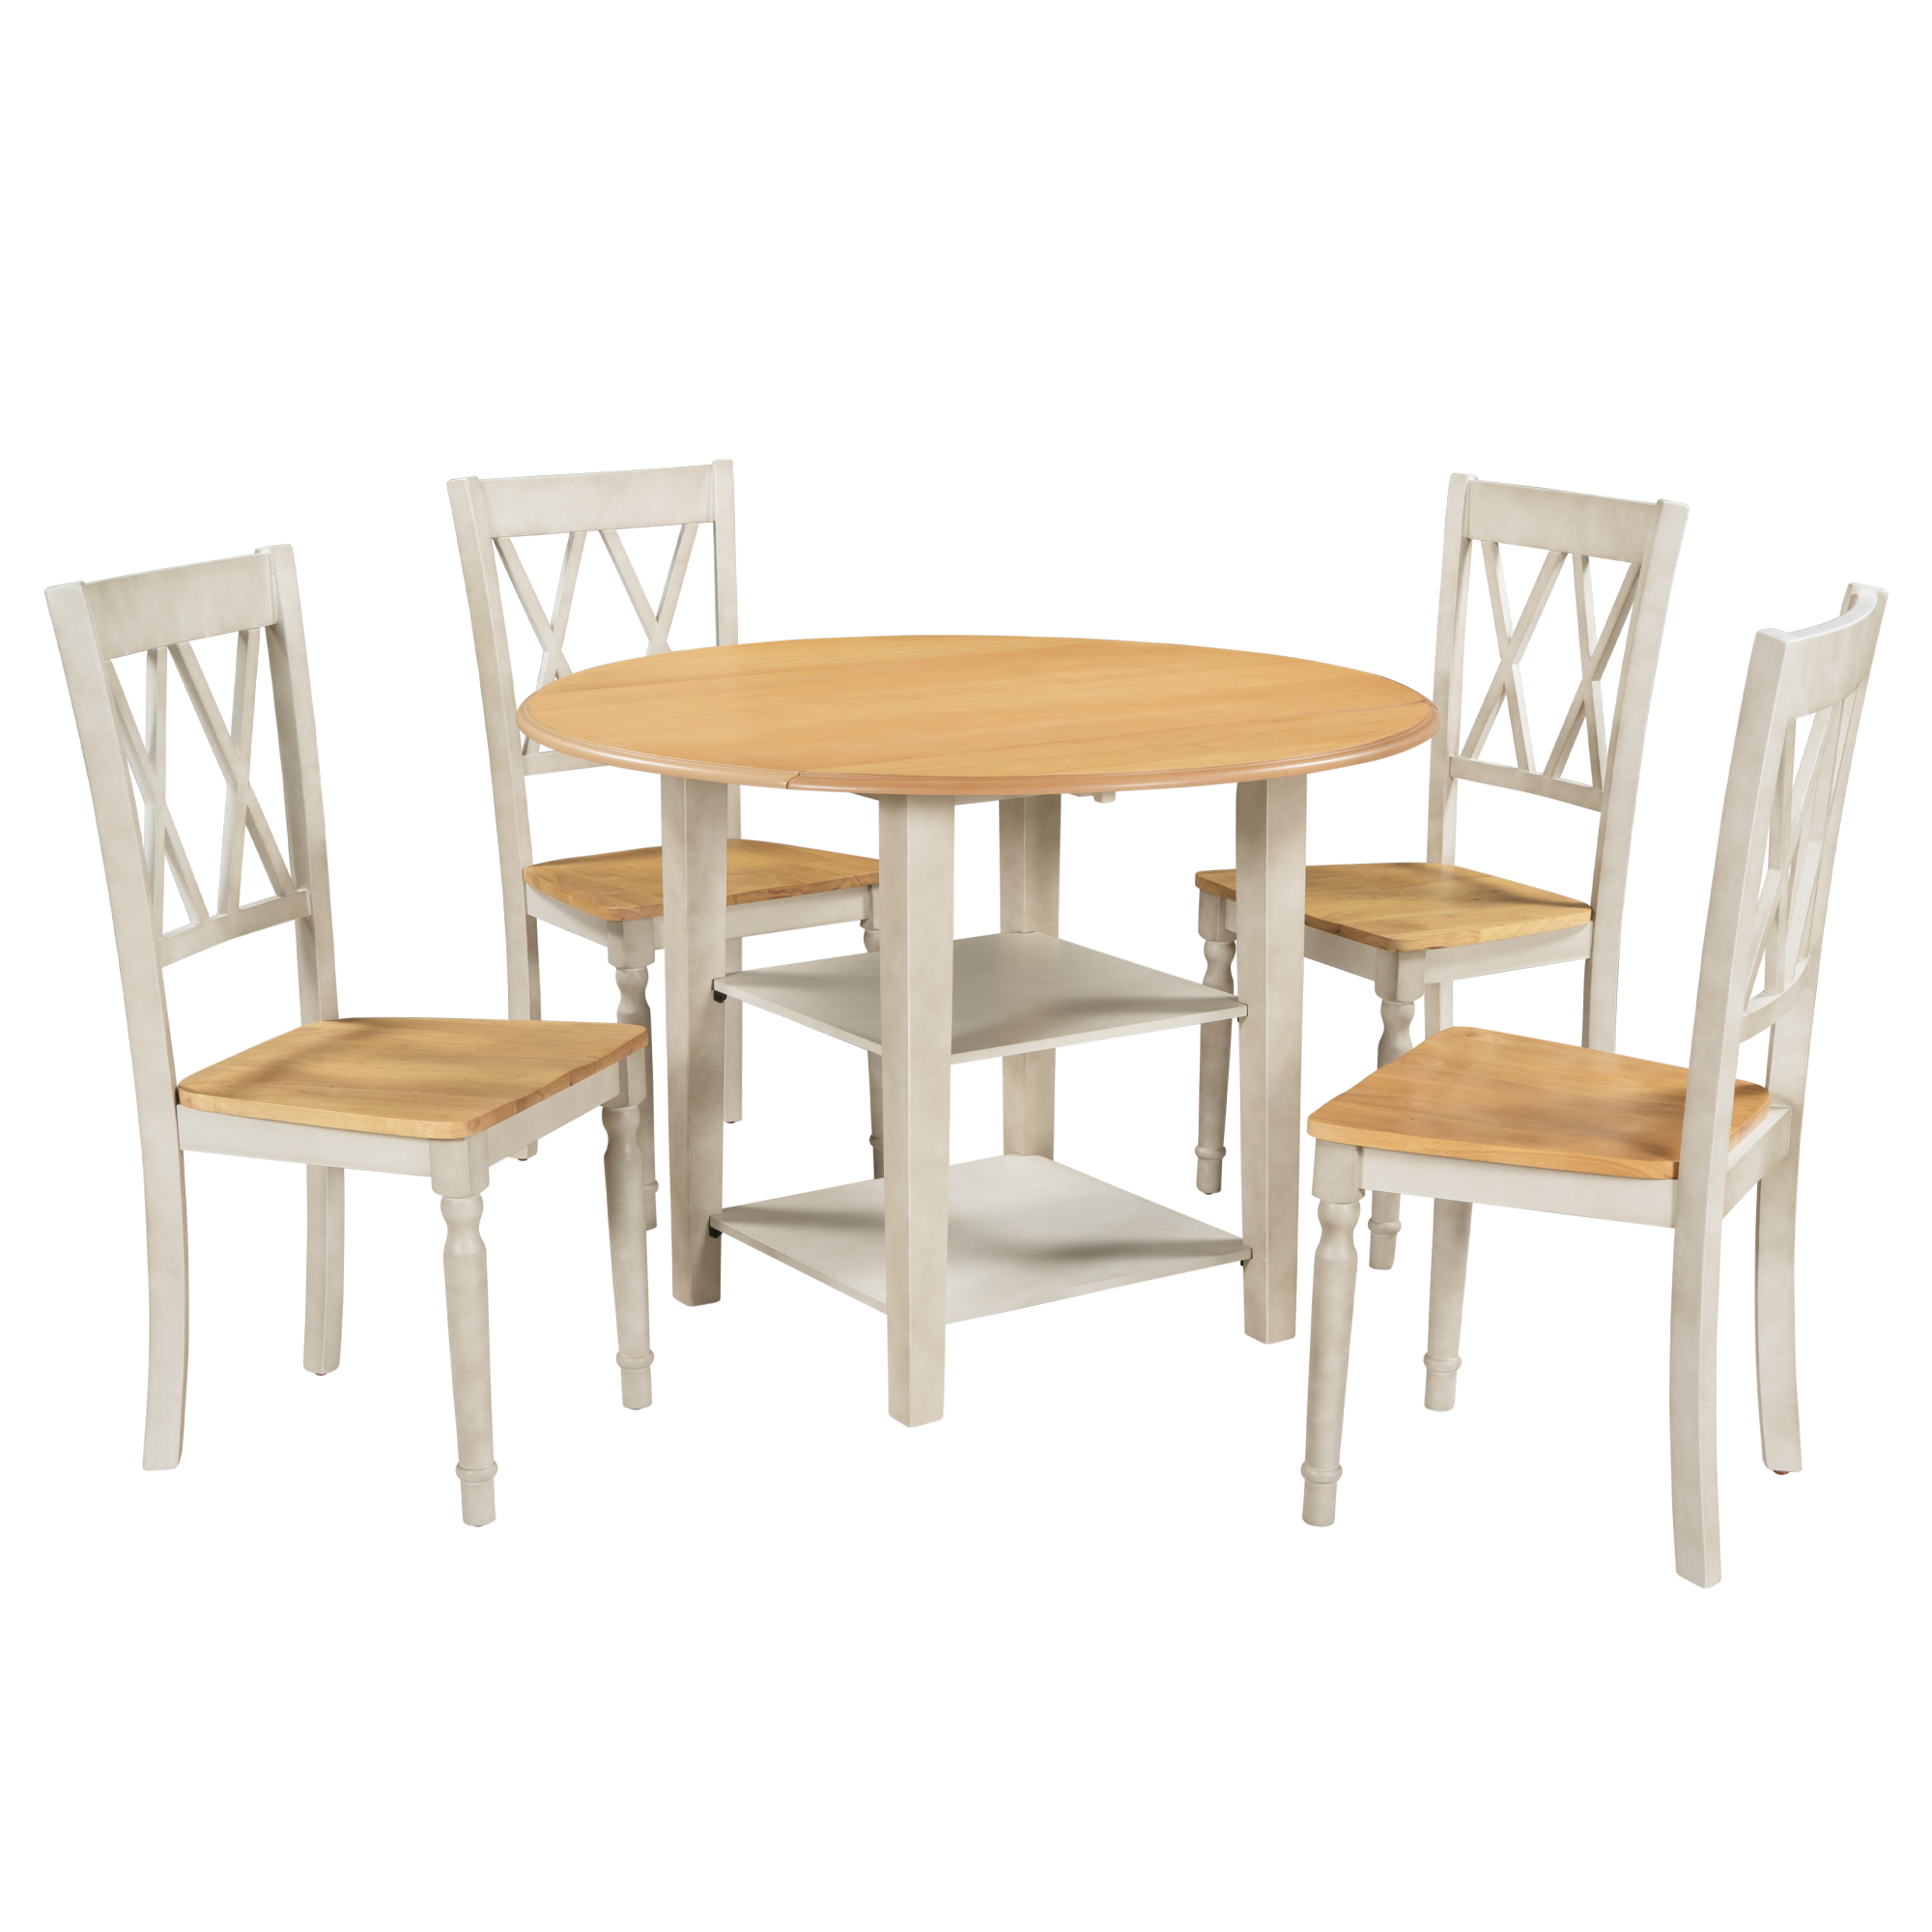 Farmhouse Wooden Round Dining Table Set, Drop Leaf Kitchen Table Set with 2-tier Storage Shelves and 4 Cross Back Chairs for Small Places,Natural+Distressed White-CASAINC